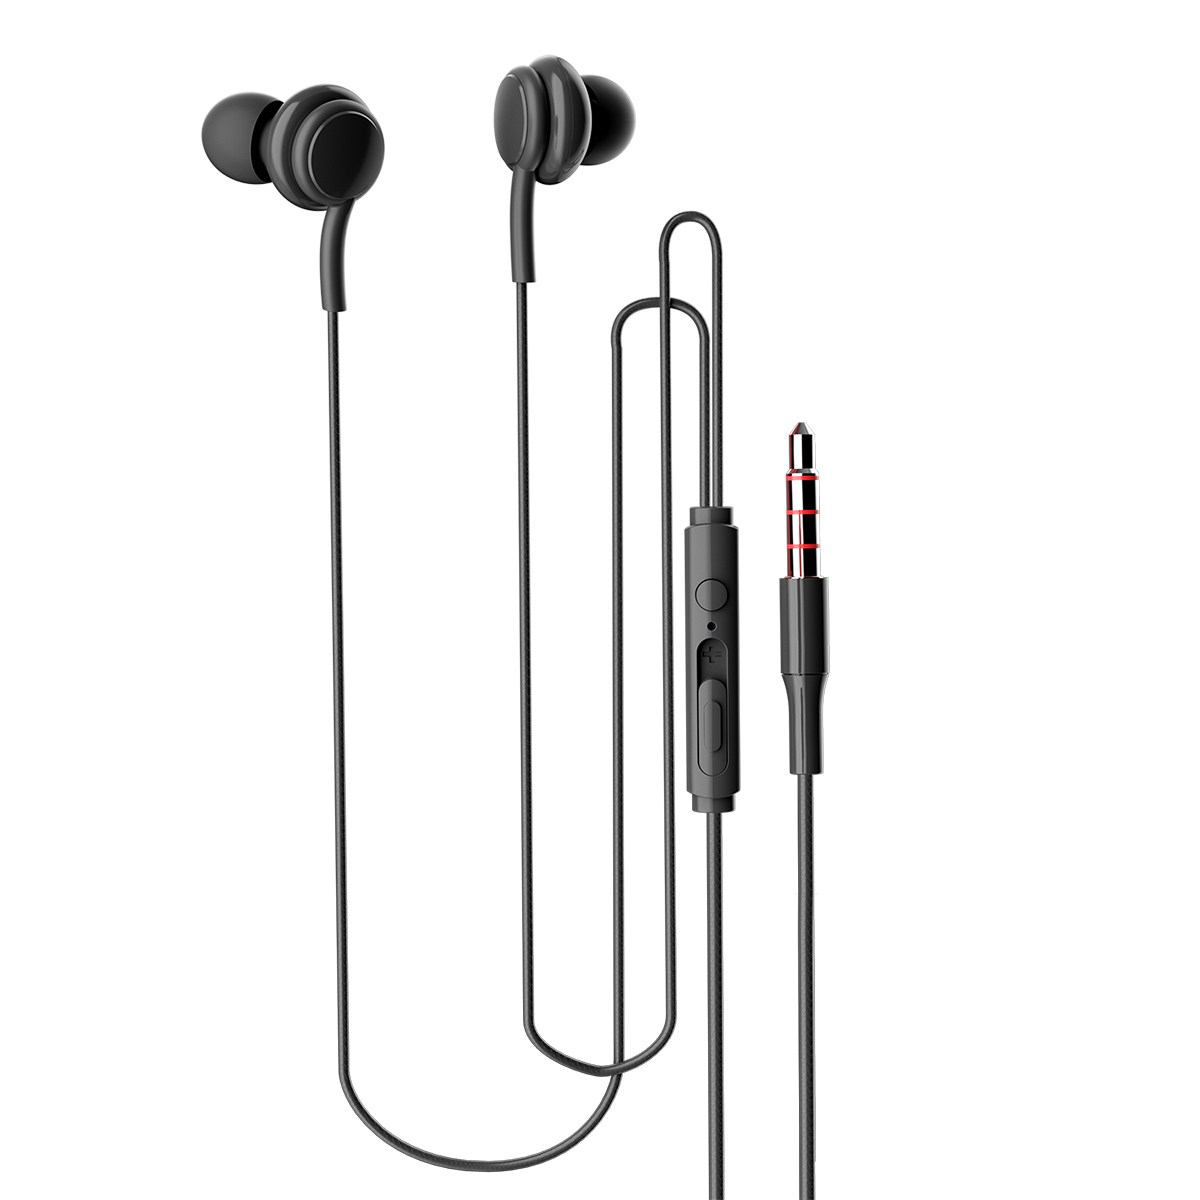 Wired Control Headphones With Microphone Candy Color Stereo In-ear Earbuds Headset Compatible For Iphone Android black